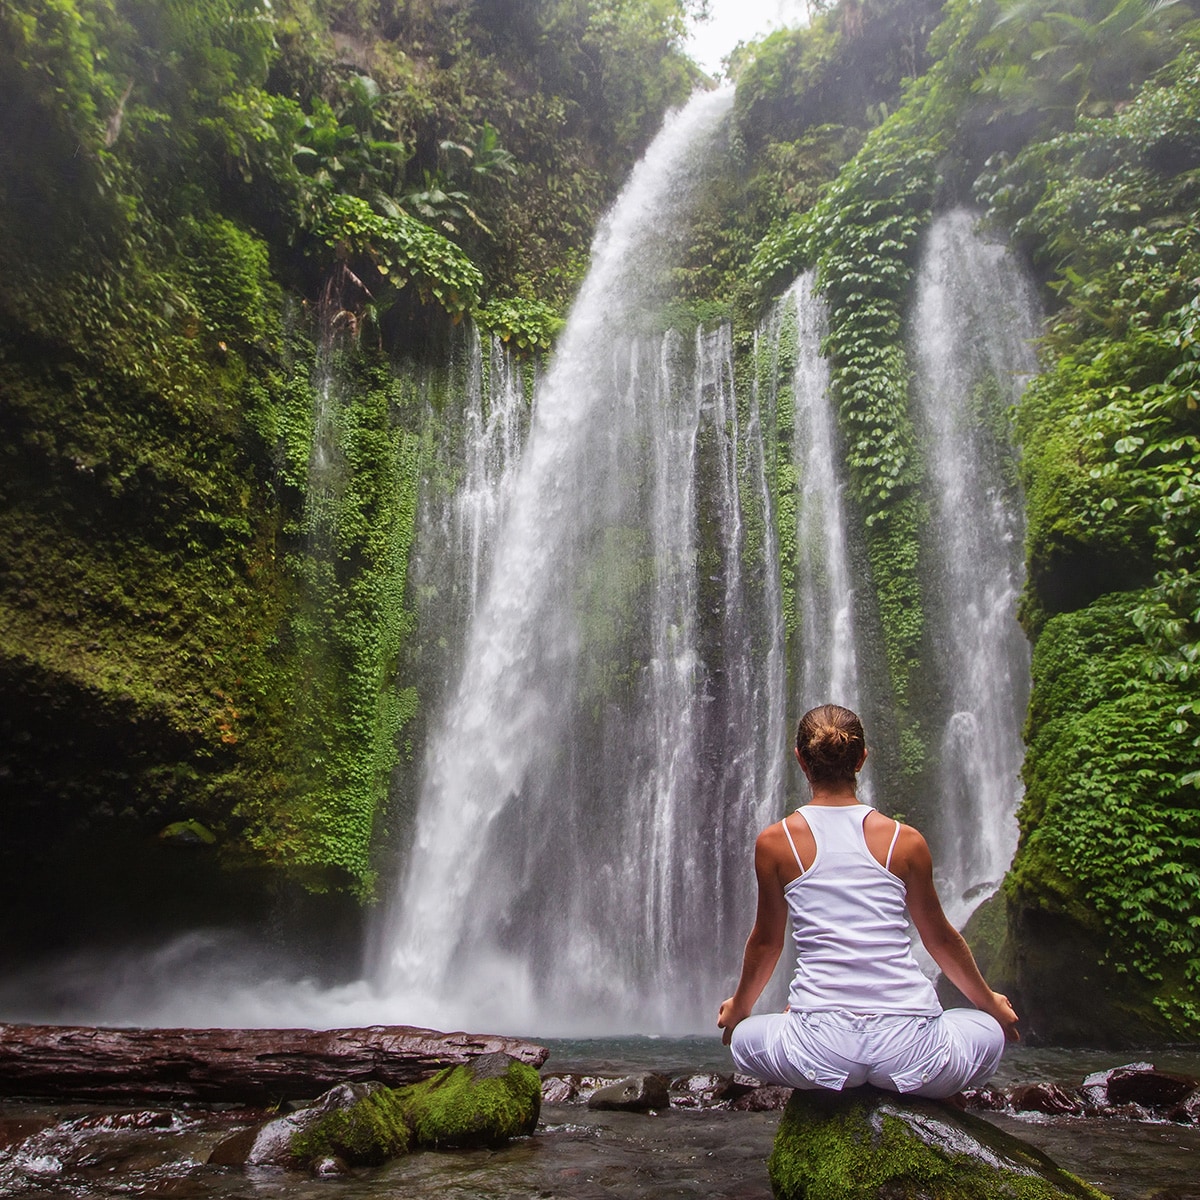 Bali's Yoga Haven: Best Place for Healing Retreats - Indonesia Travel